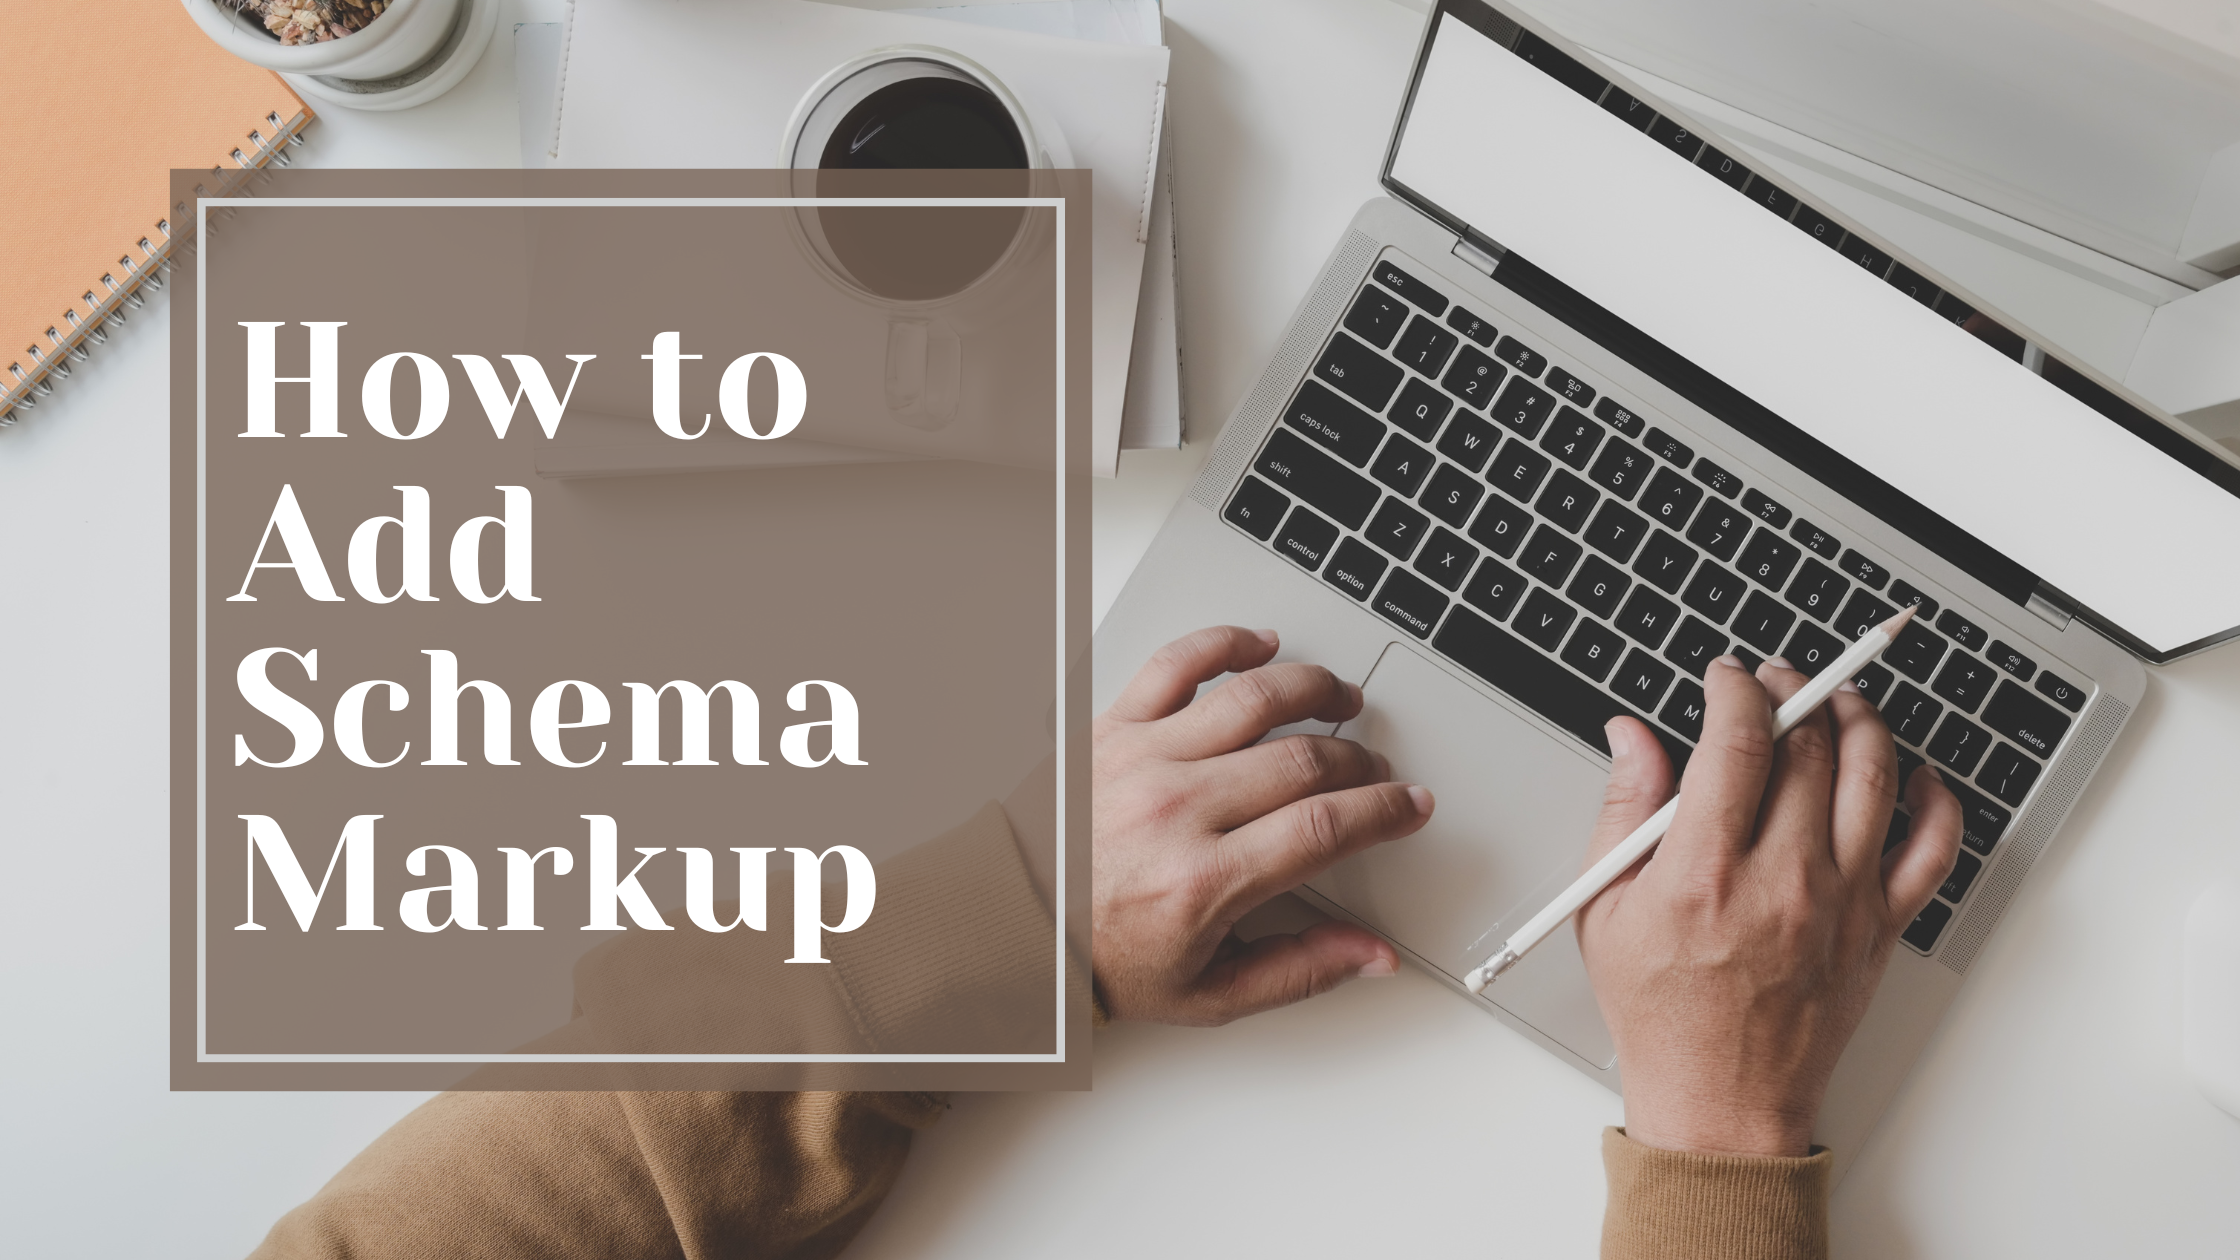 How to Add Schema Markup to About Us Page on WordPress Website